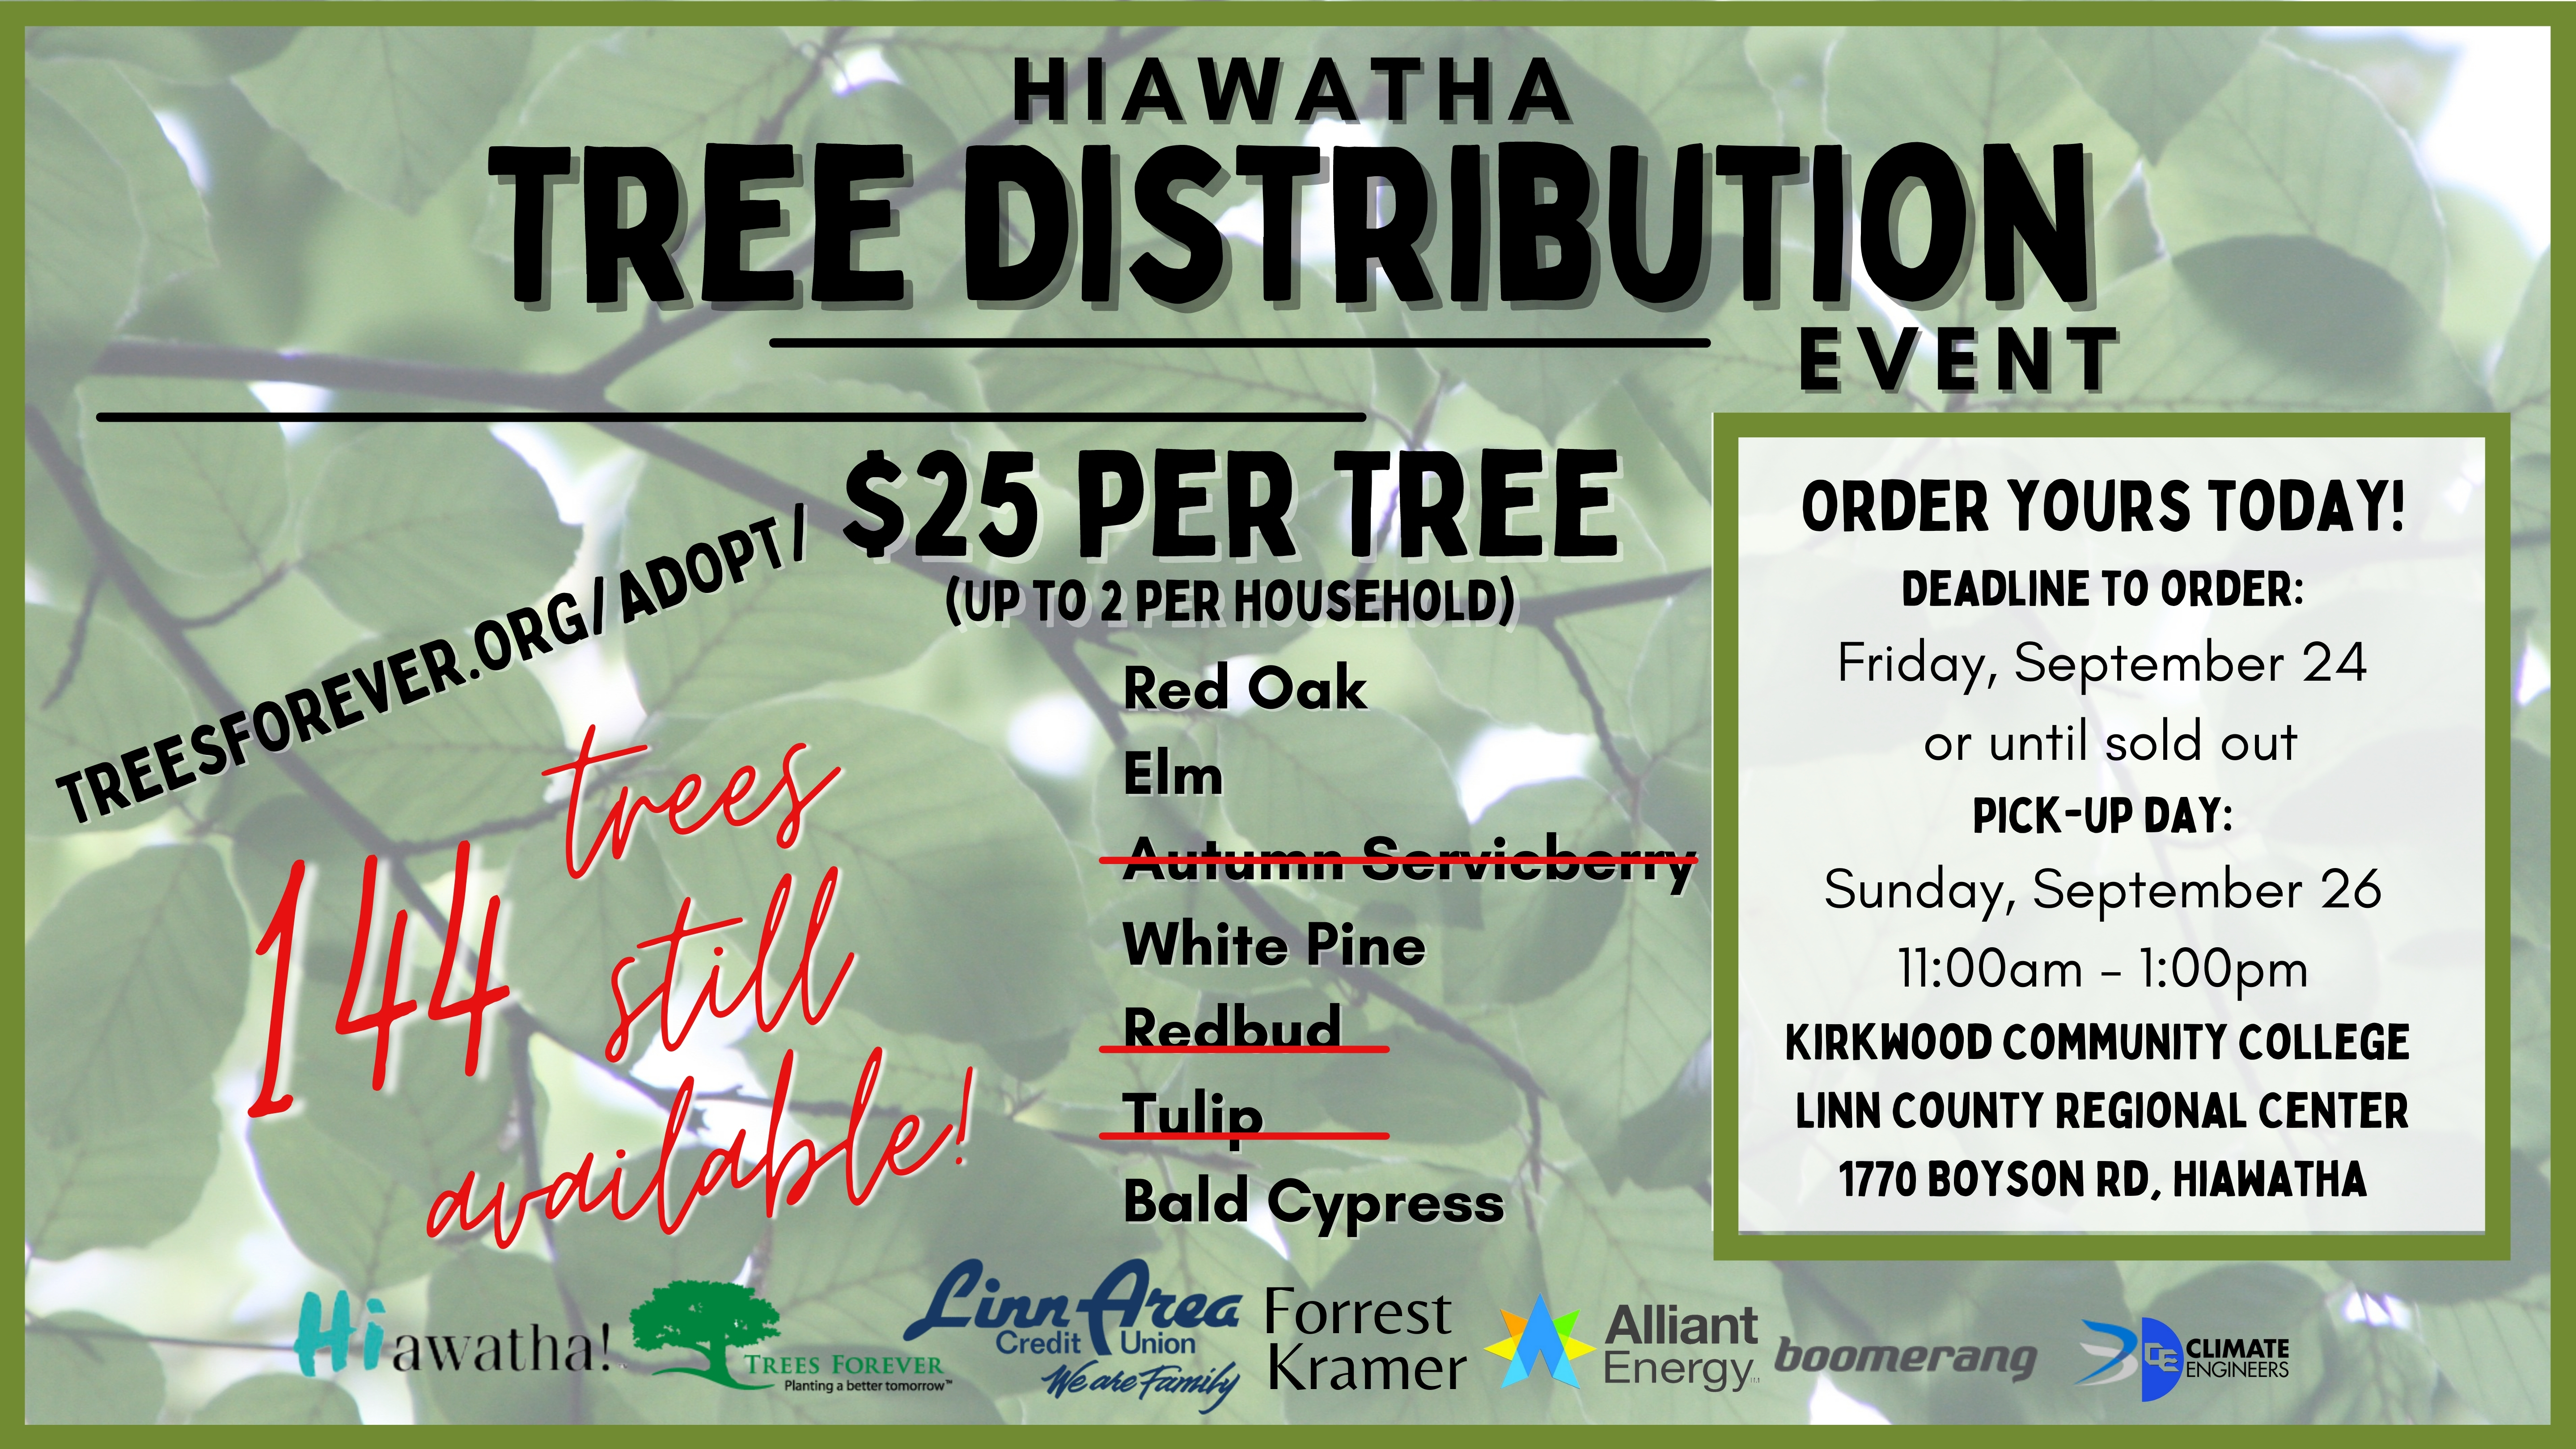 144 Trees Available for Purchase! Reserve Yours Today and Pickup on Sunday, September 26!